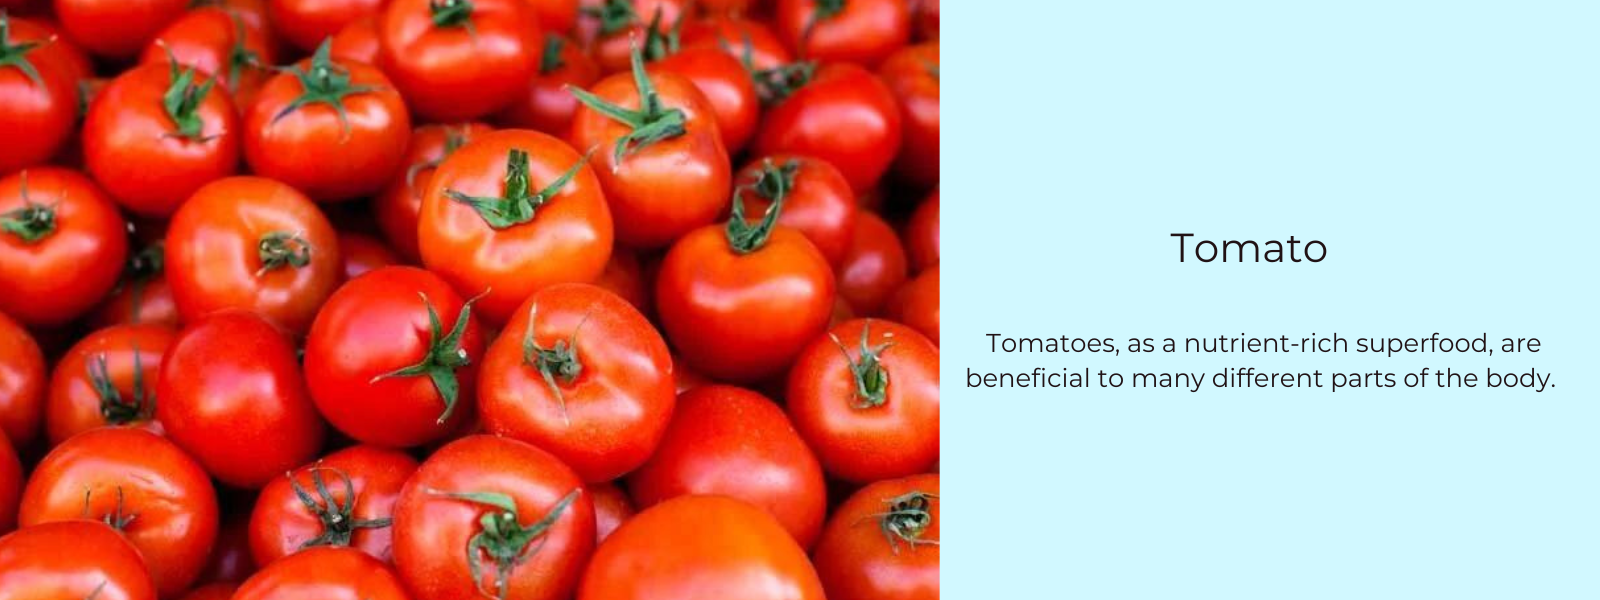 Tomato – Health Benefits, Uses and Important Facts